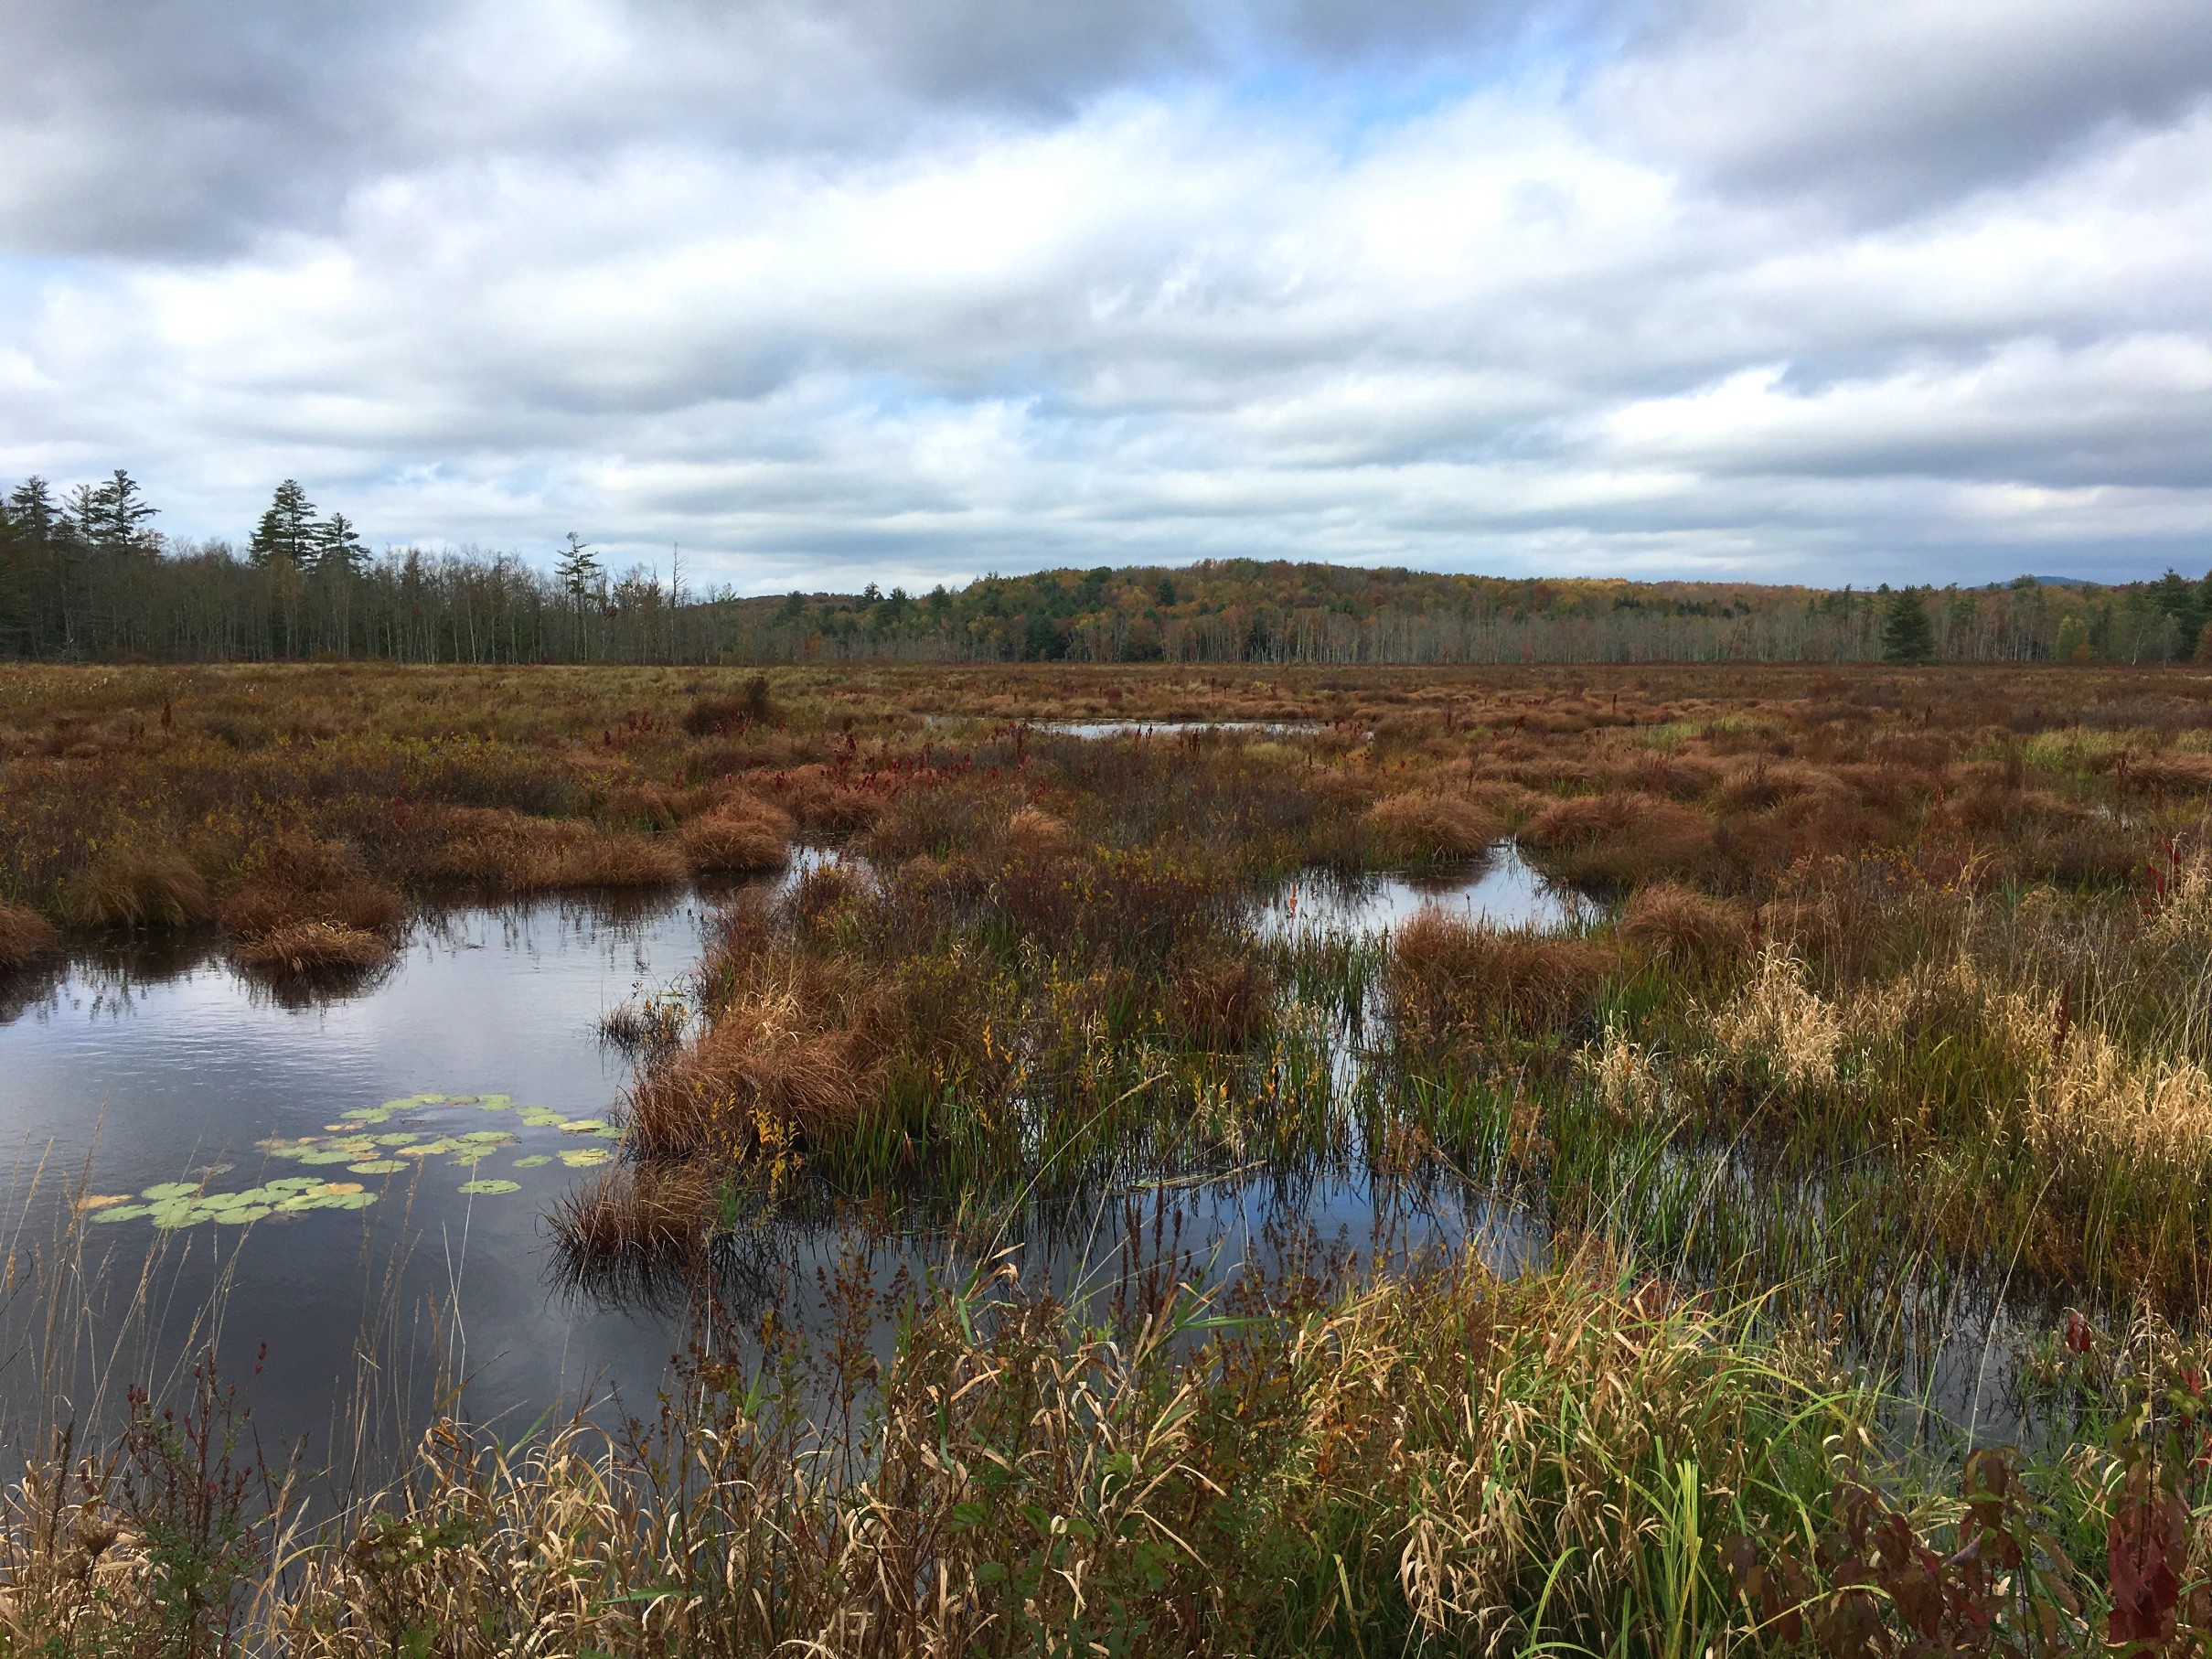 Autumn view of marsh with swamp in background and cloudy sky